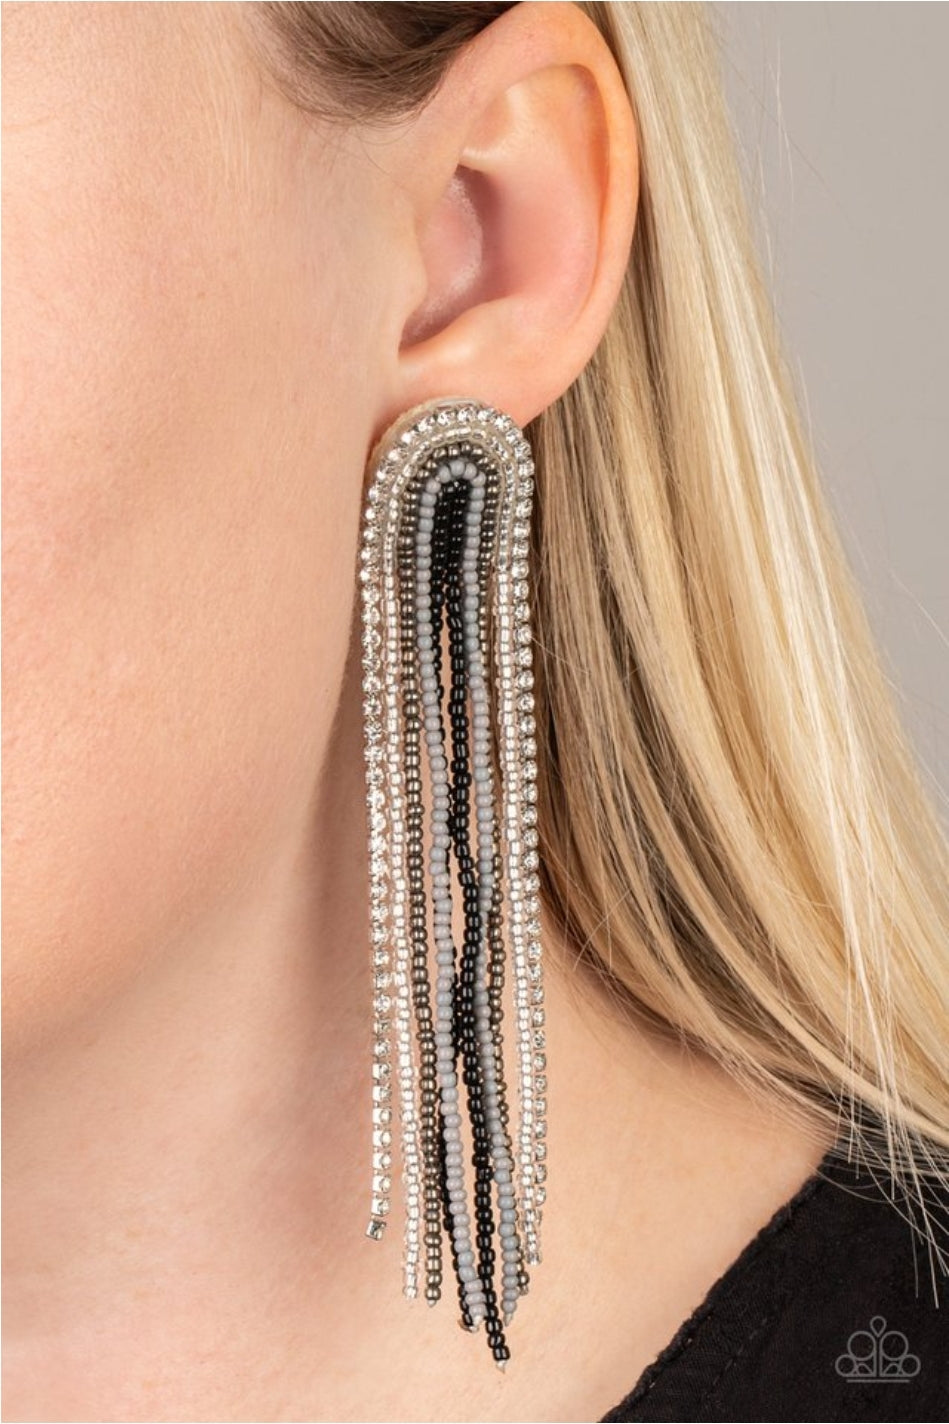 Paparazzi Accessories - Let There Bead Light - Black Post Earrings